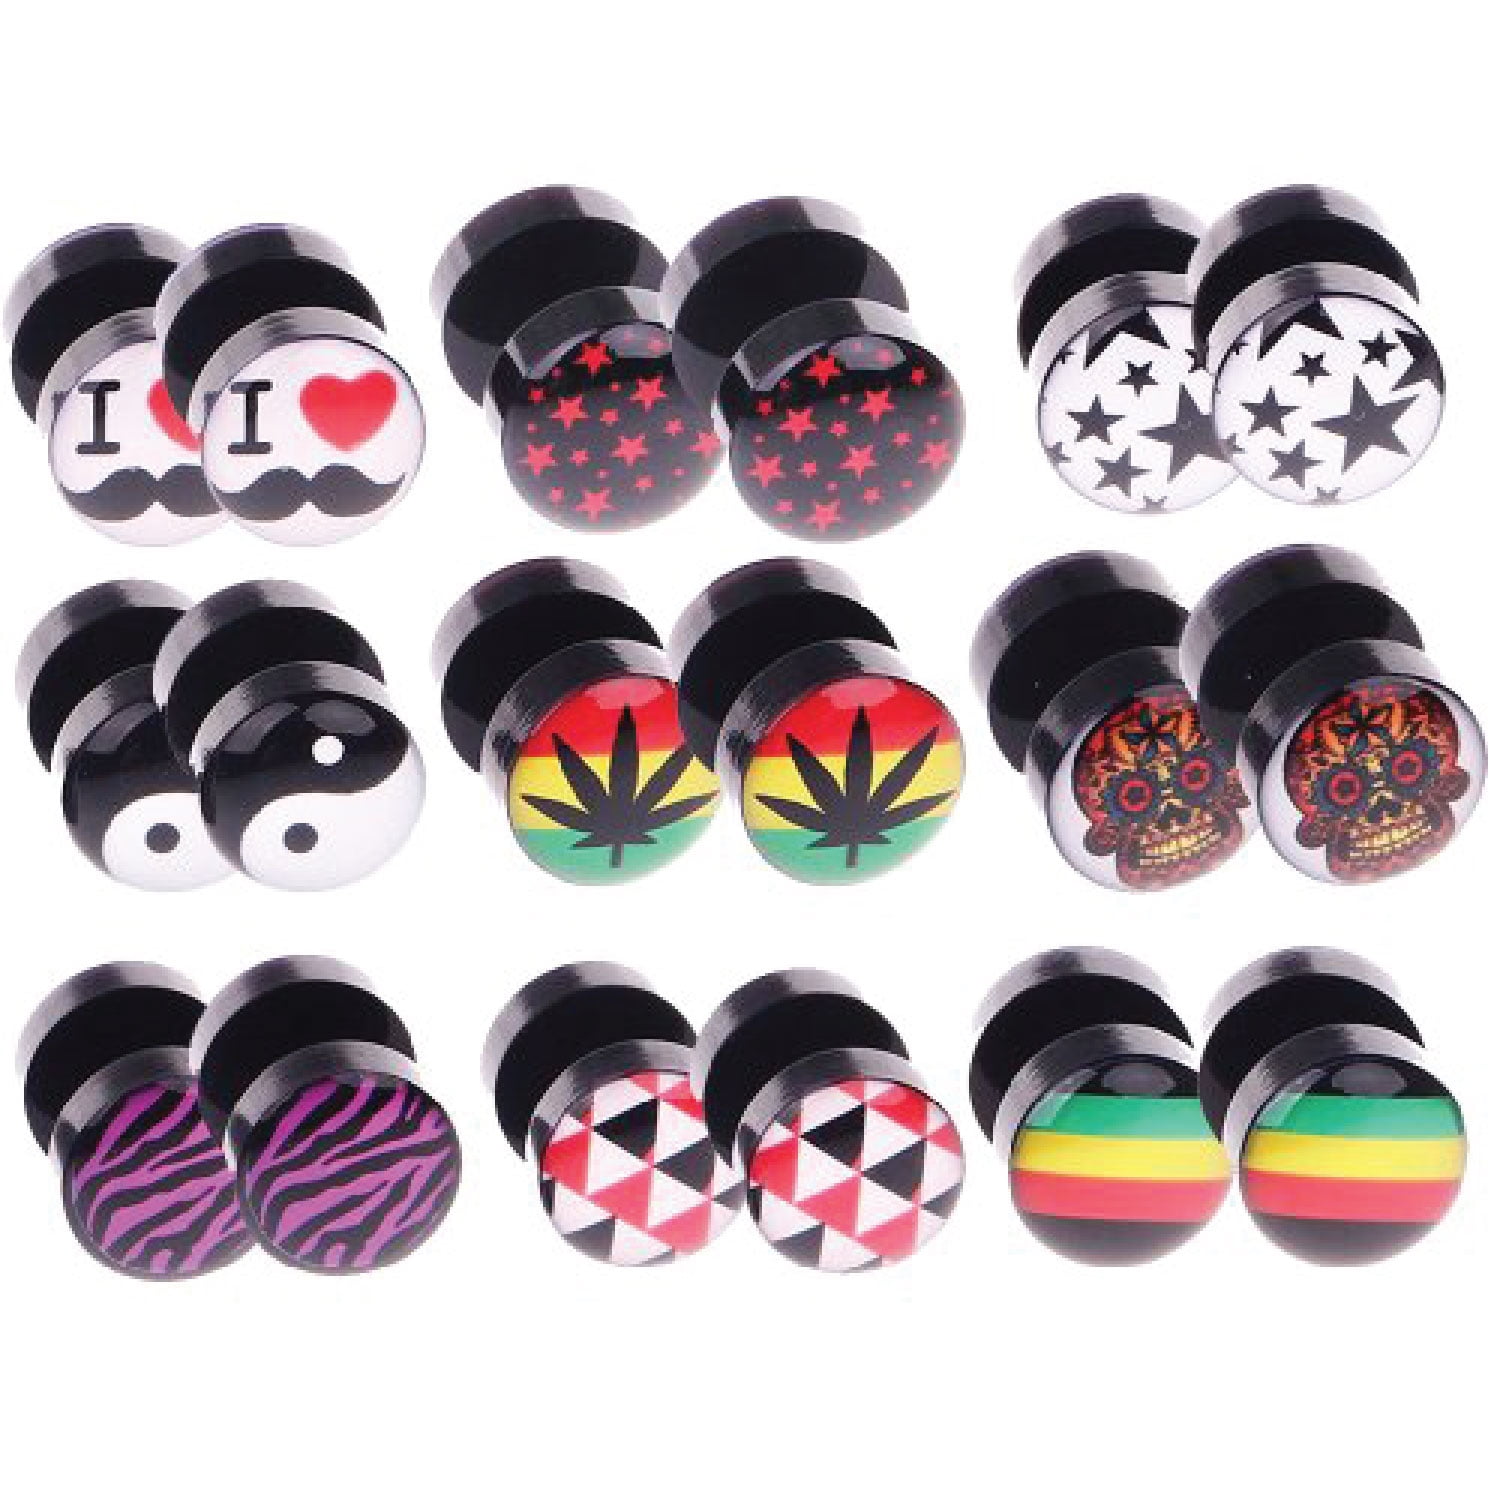 Black Acrylic Fake Ear Plugs Tunnel with Floral Skull  Logo & "O" Ring 